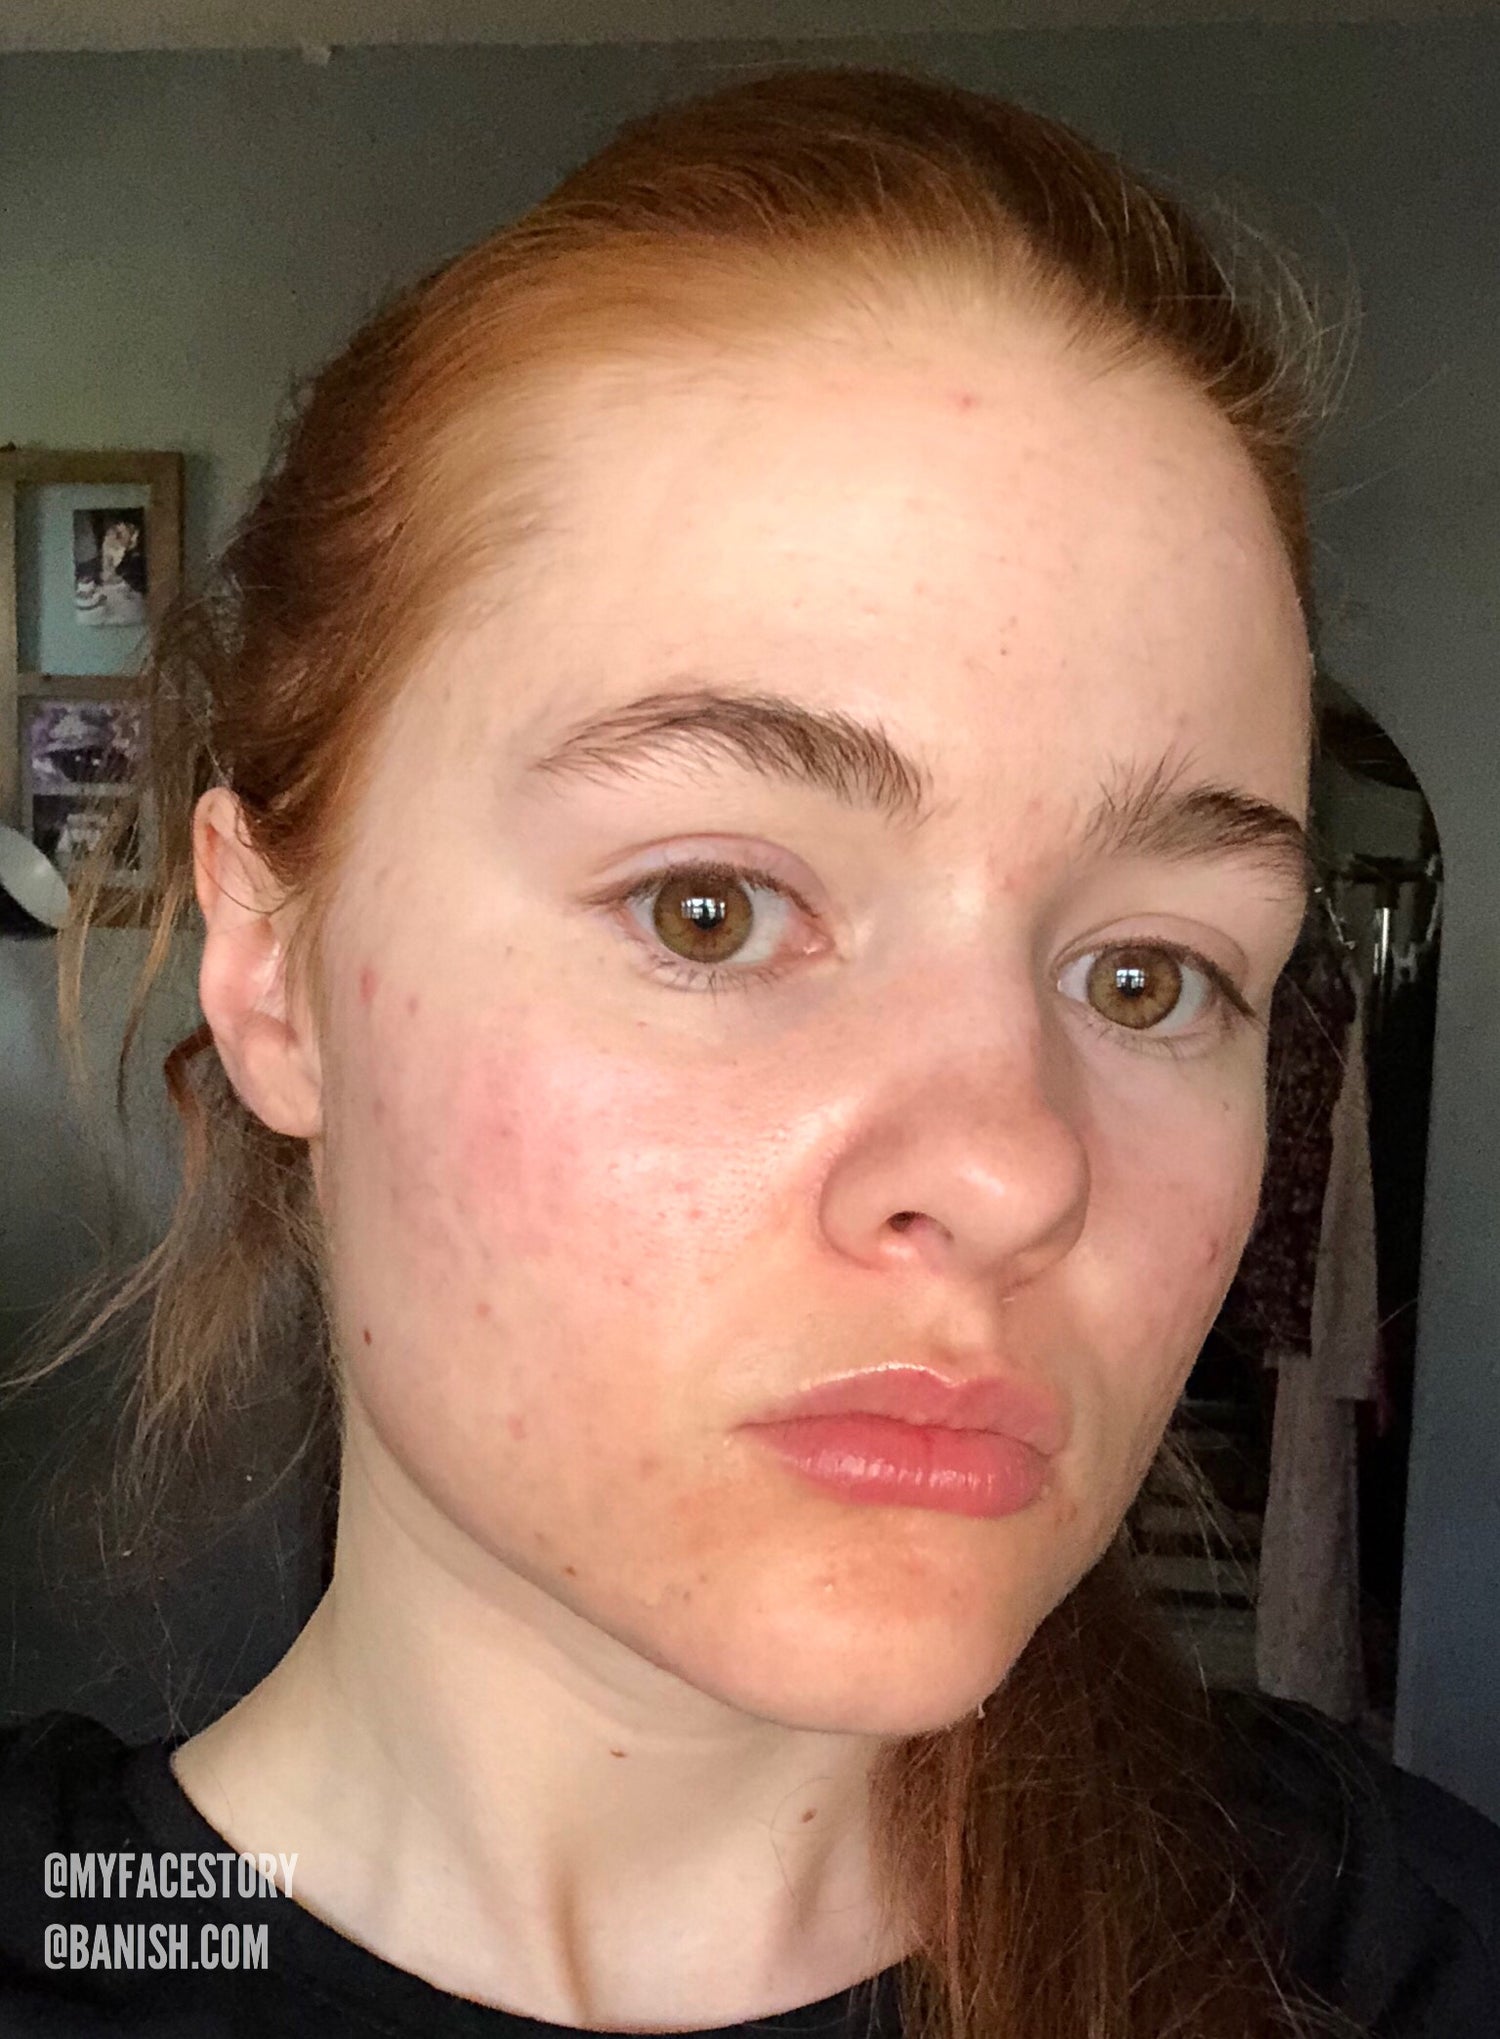 Why Showing Off Your Acne on Instagram is the Hot New Trend You WANT to Try